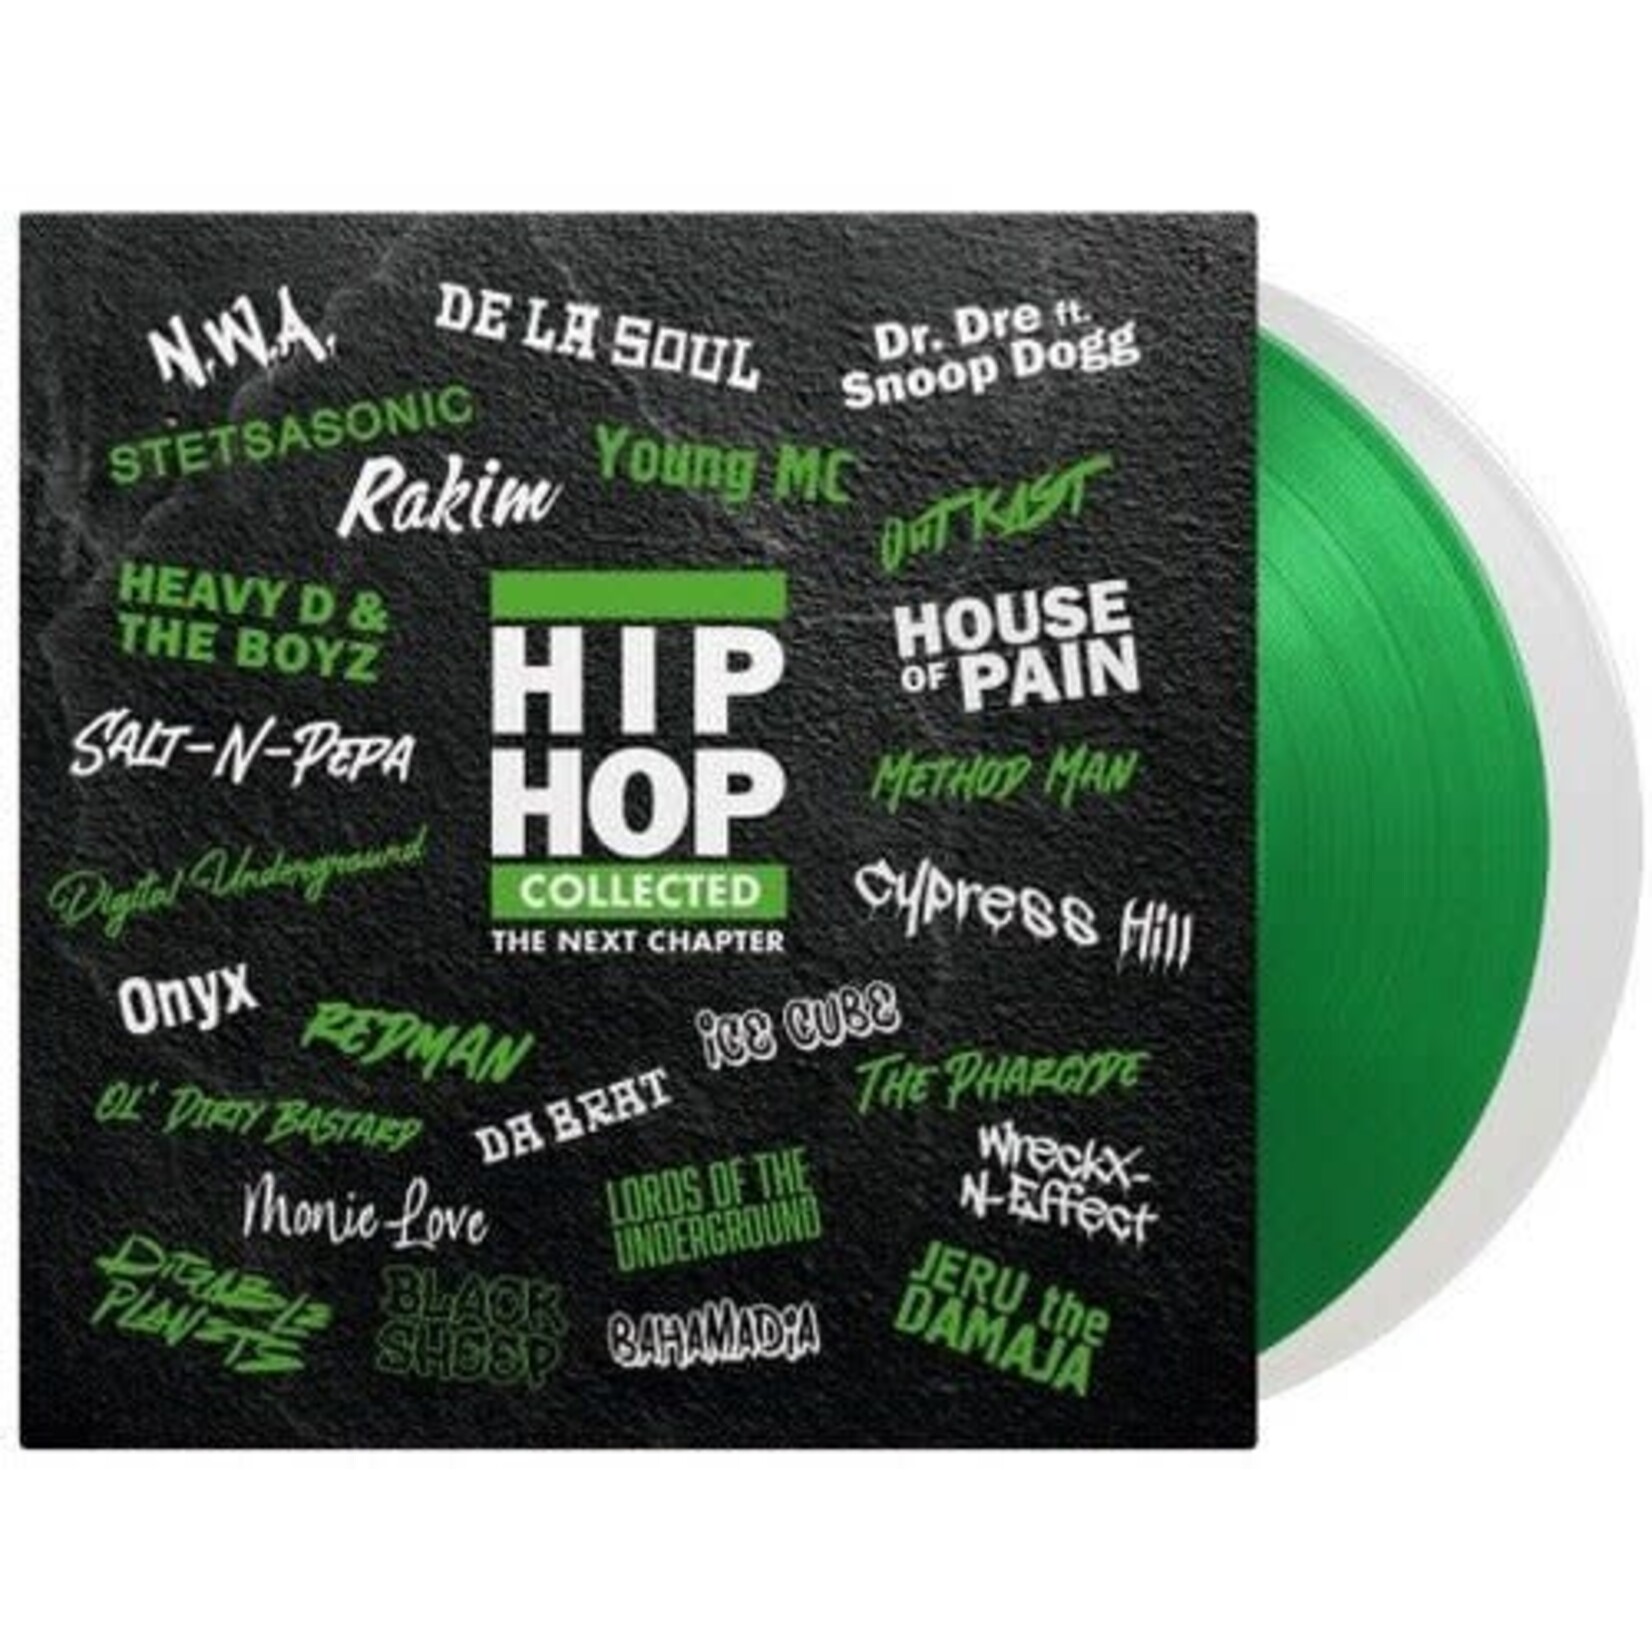 [New] Various Artists: Hip Hop Collected - The Next Chapter (2LP, 180g, green / white vinyl) [MUSIC ON VINYL]